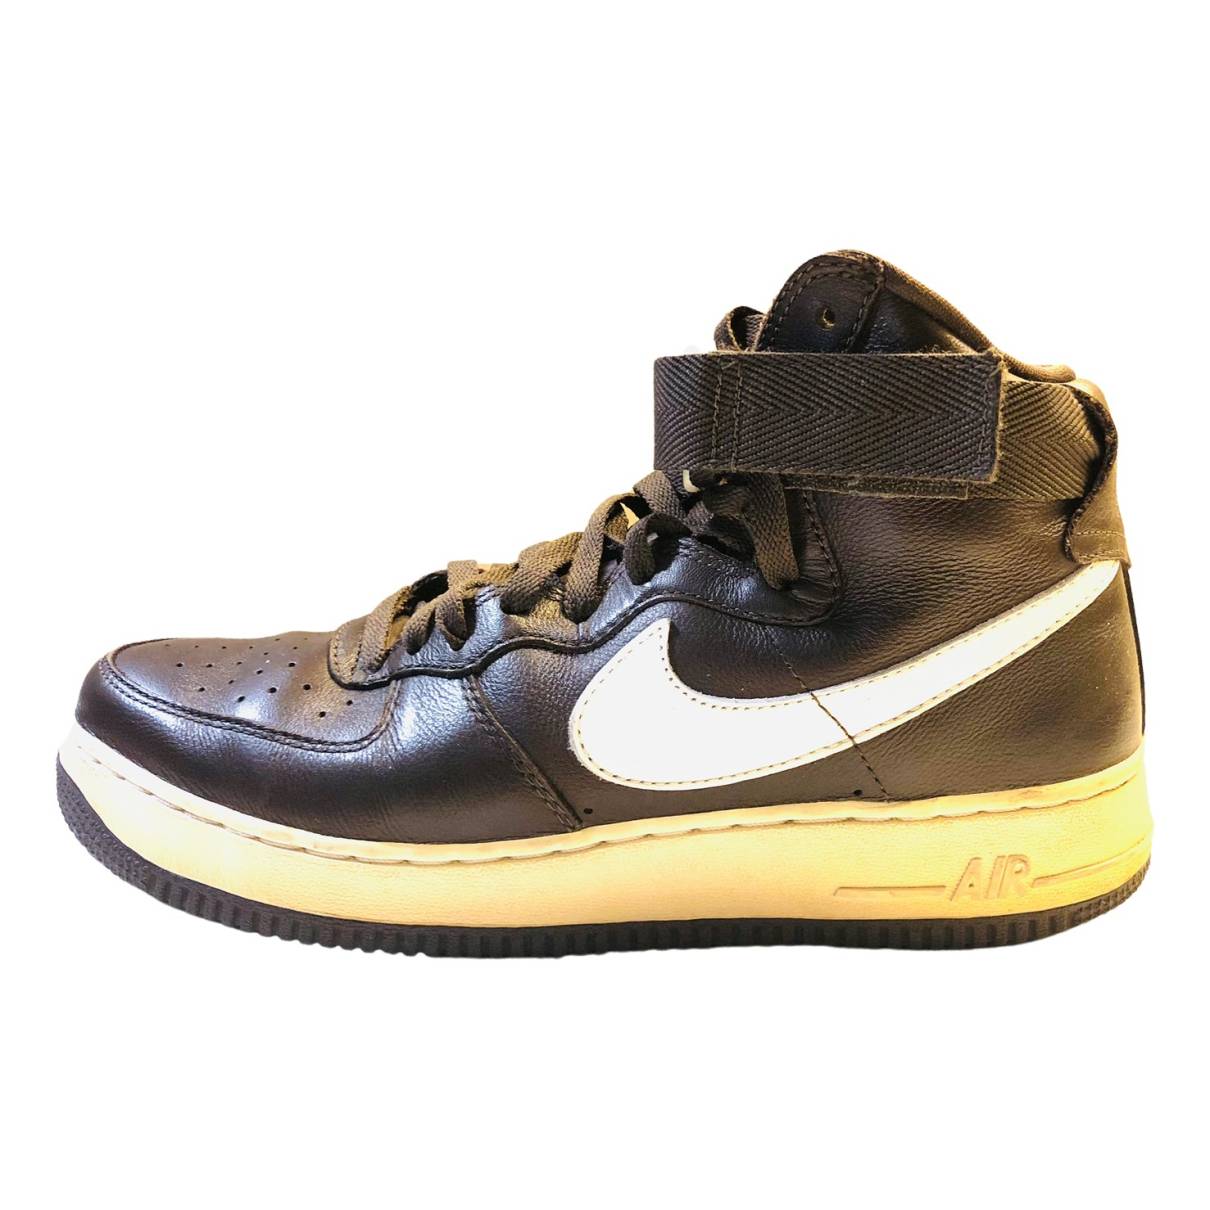 Air force 1 leather high trainers Nike Brown size 42.5 EU in Leather -  33893877